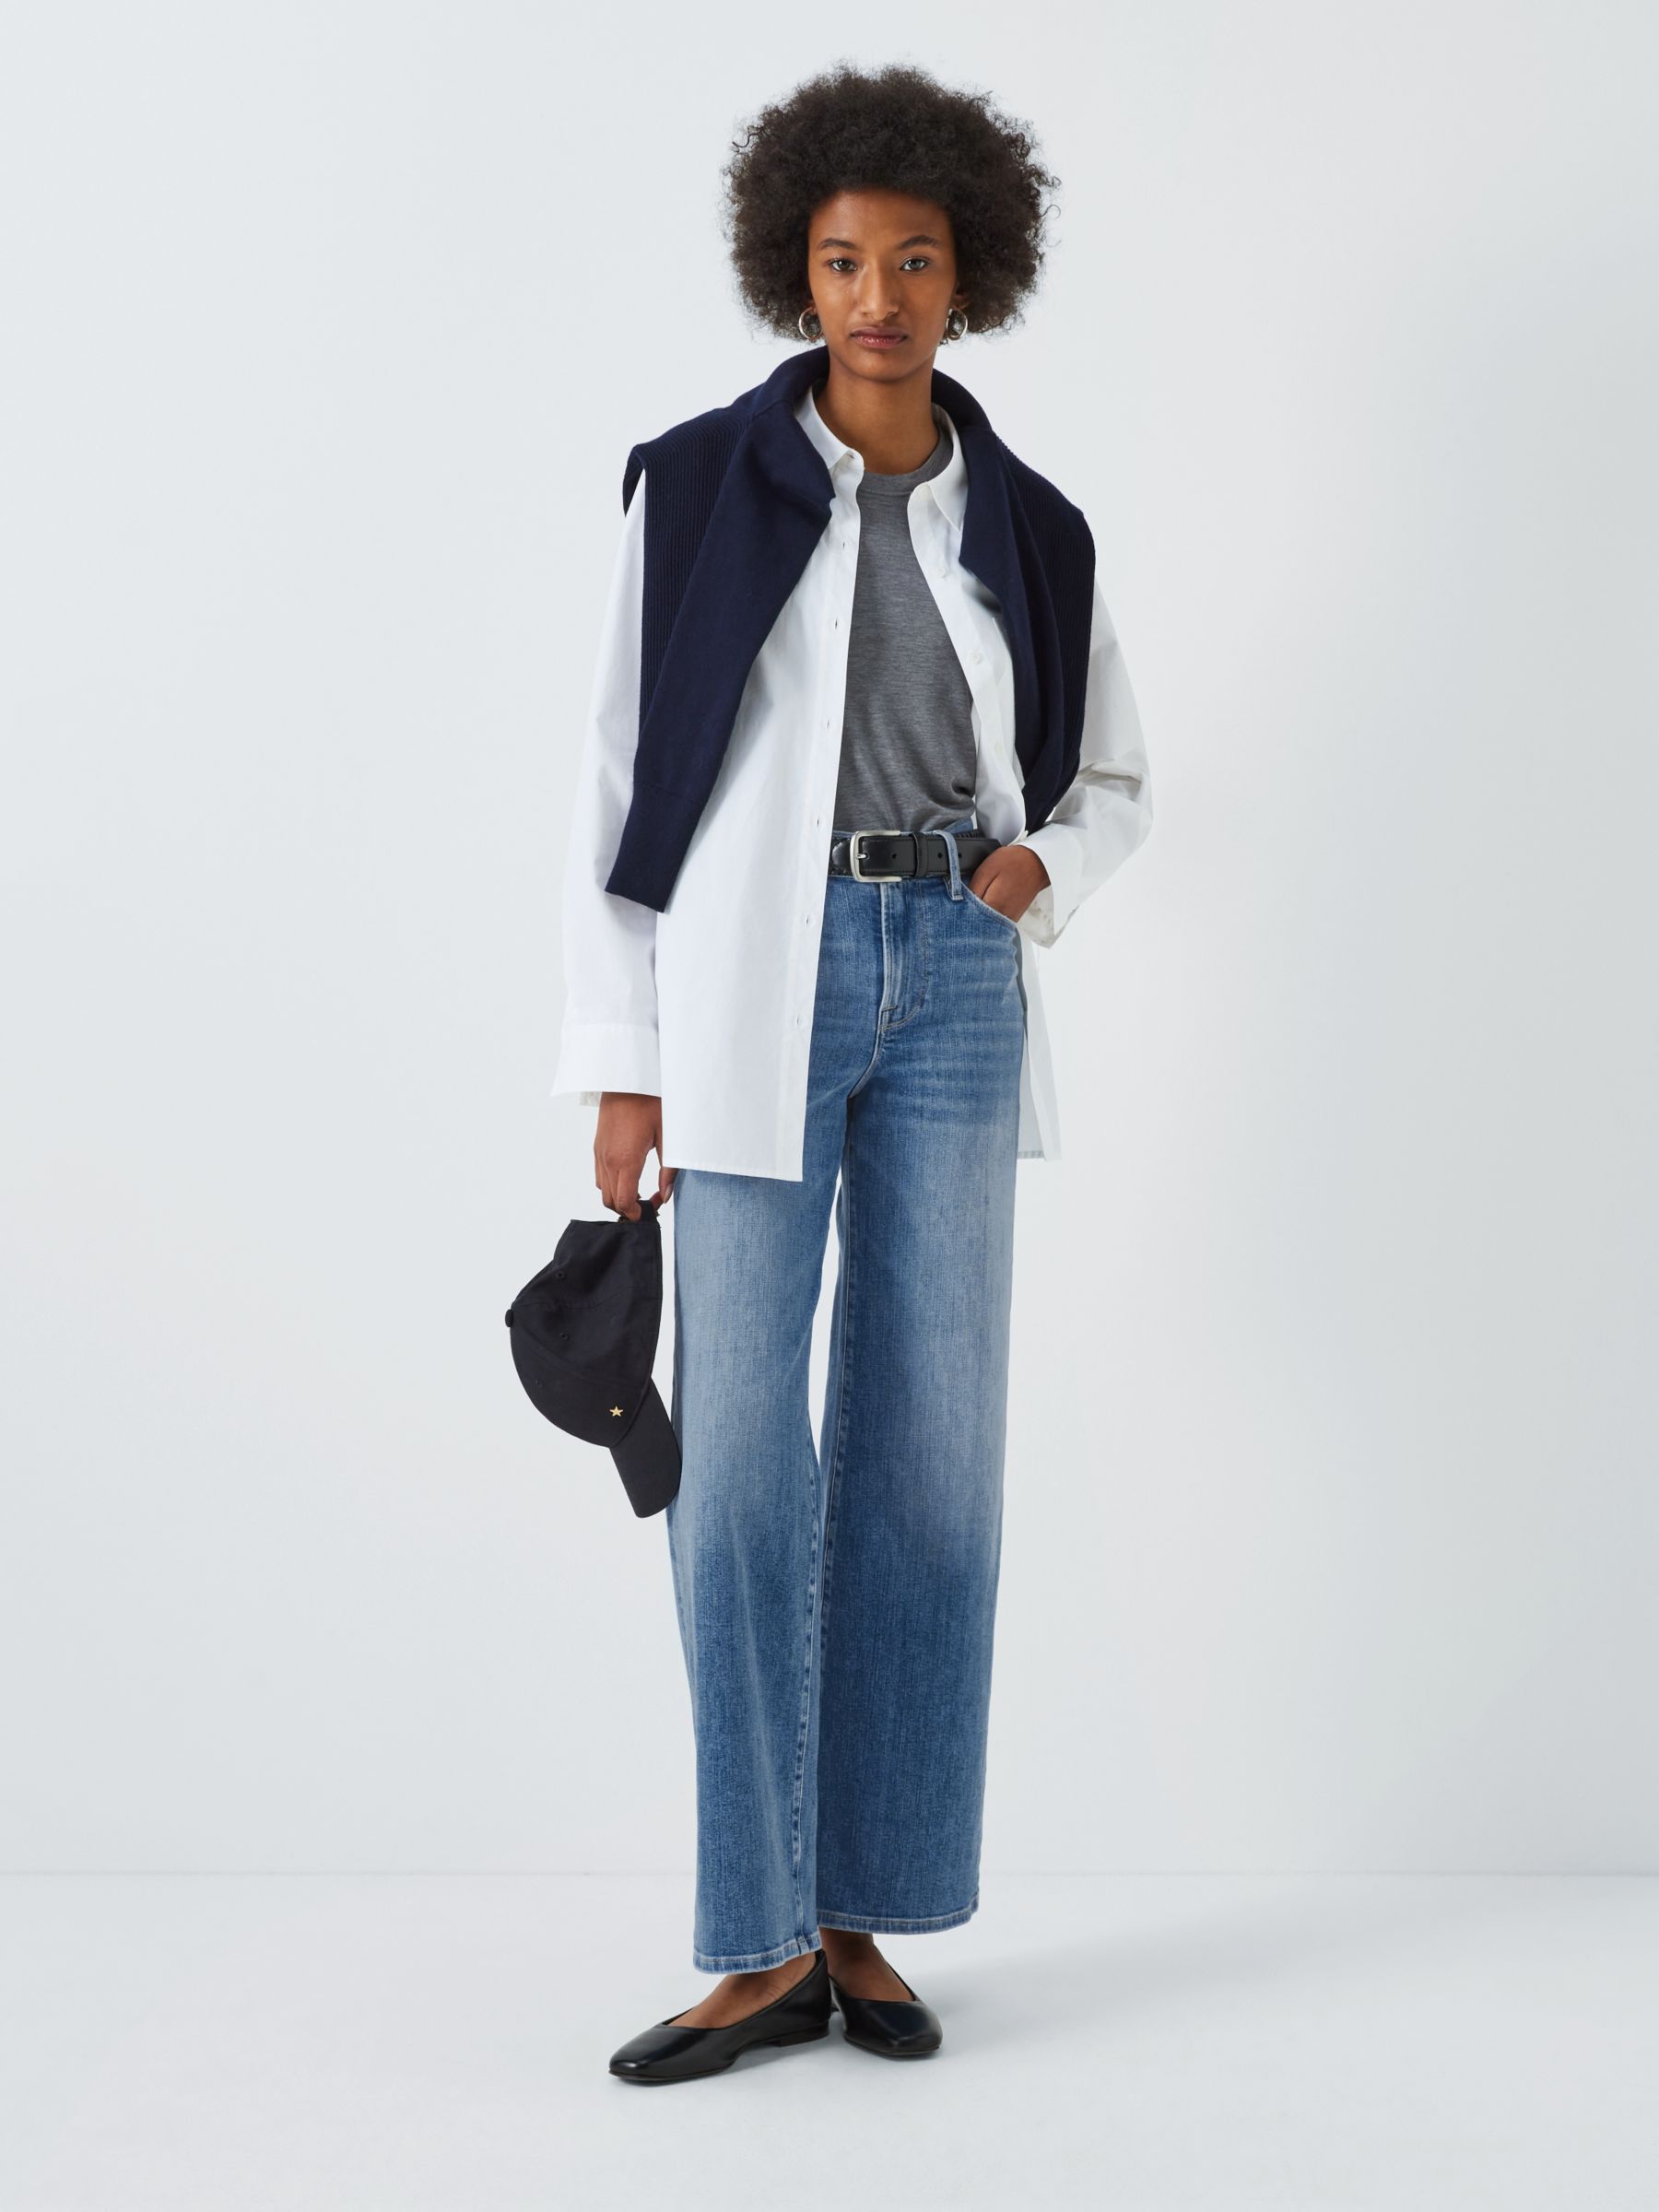 FRAME Le Slim Palazzo mid-rise wide-leg jeans